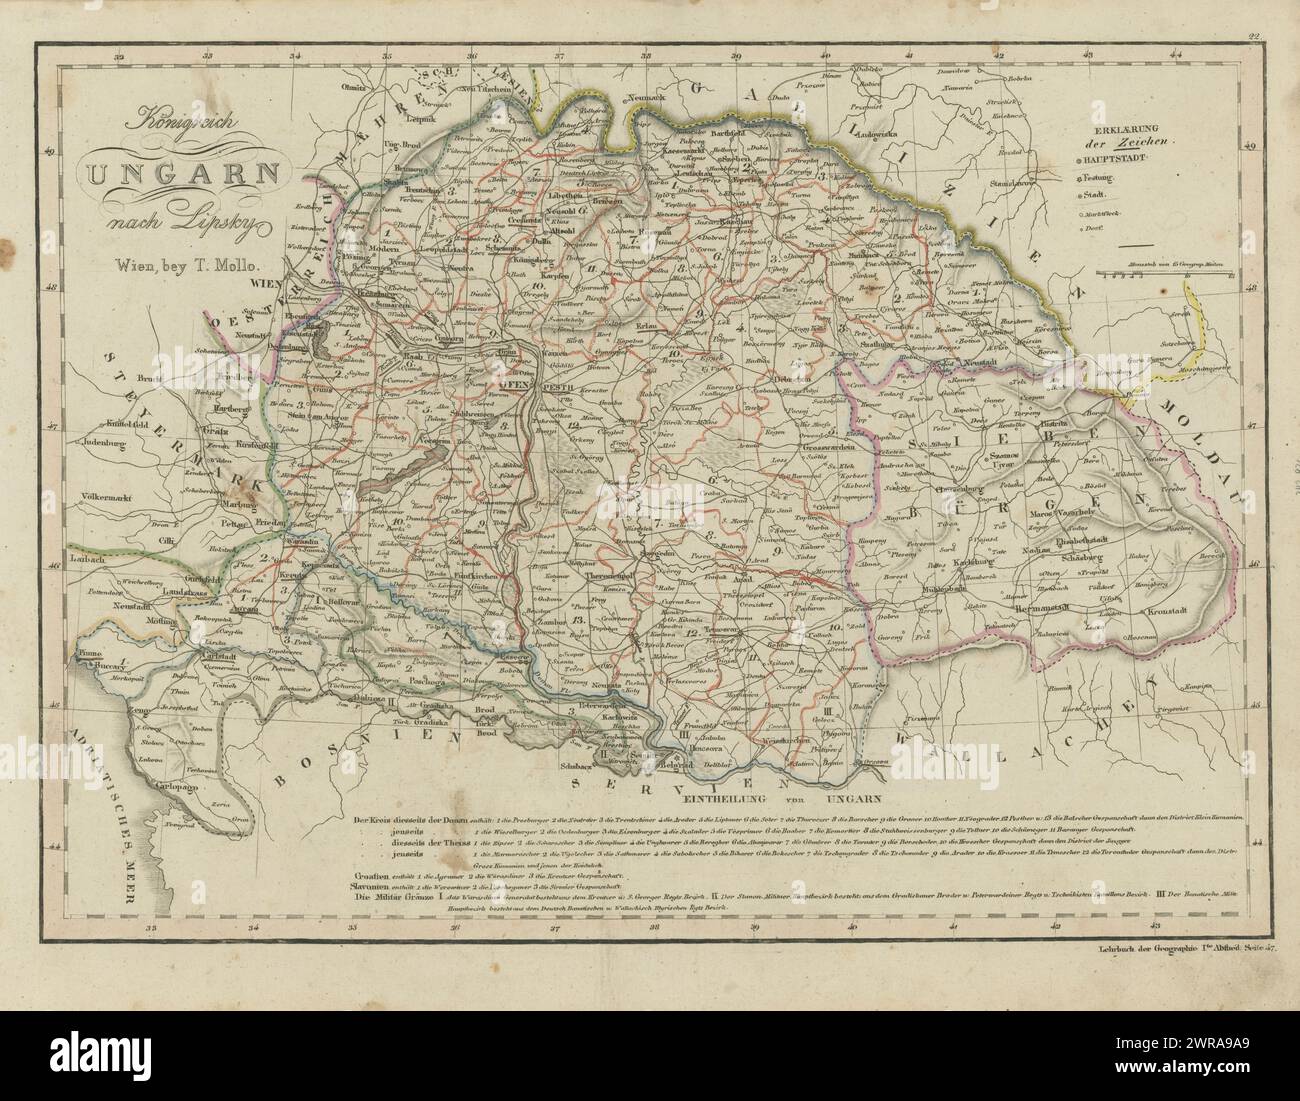 Vintage map of Hungarian kingdom in 1825, ideal for decoration Stock Photo